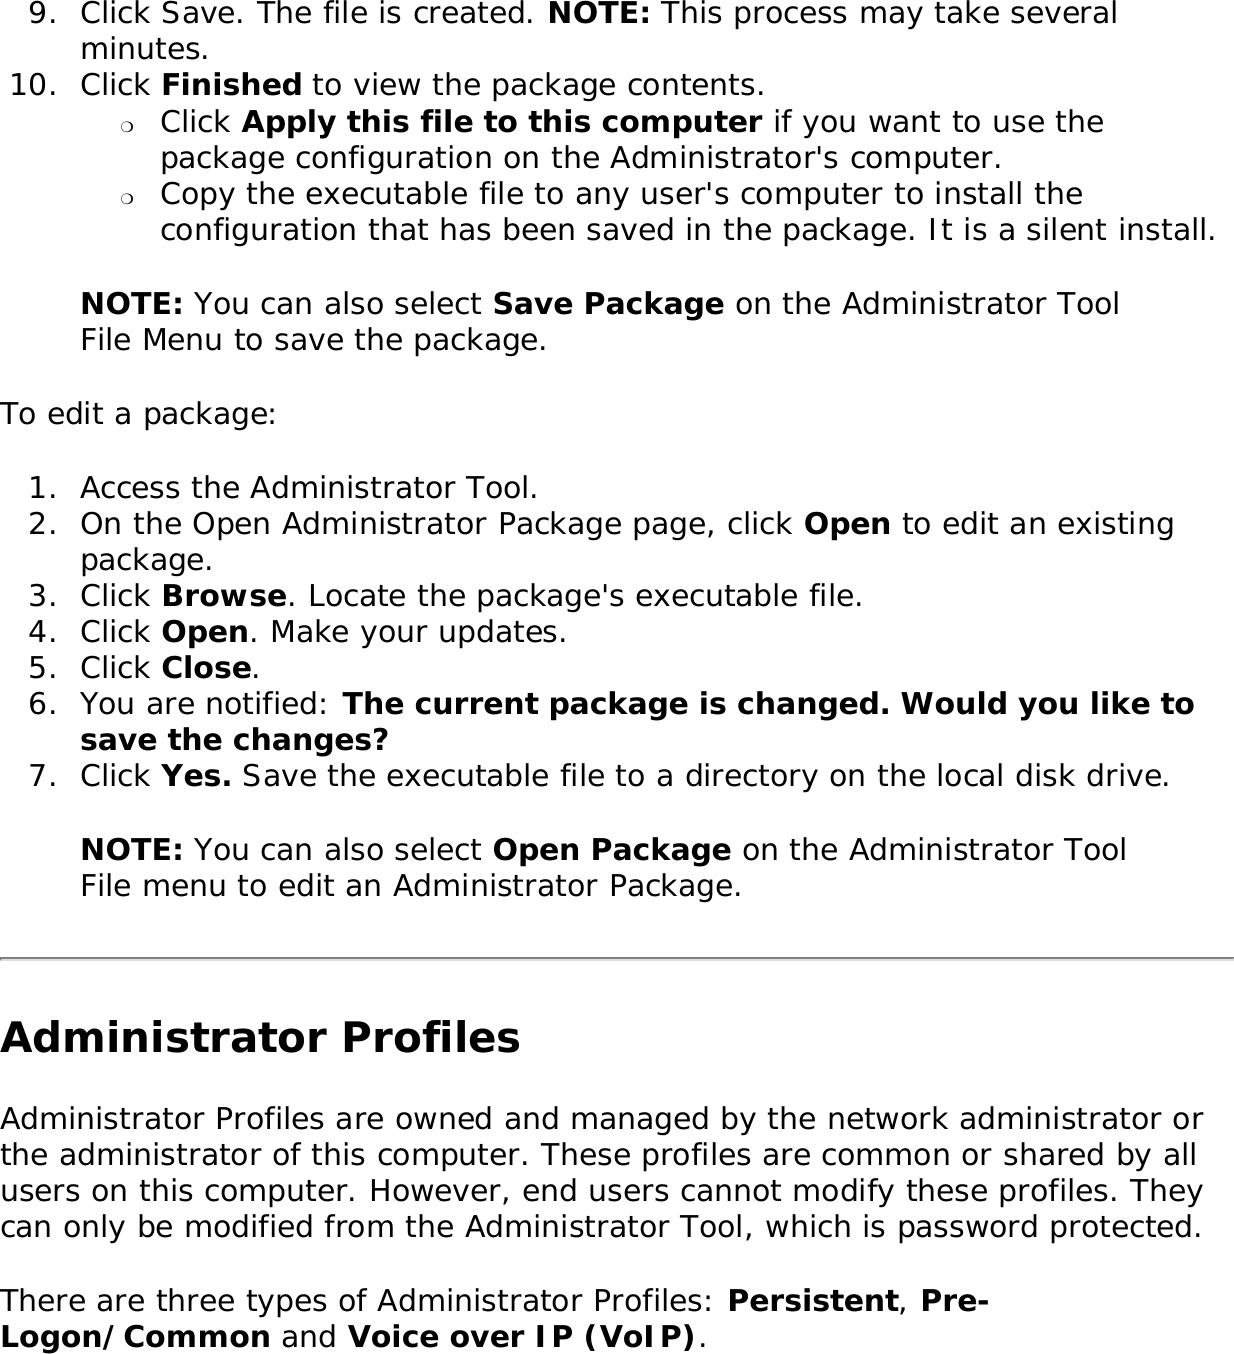 9.  Click Save. The file is created. NOTE: This process may take several minutes. 10.  Click Finished to view the package contents. ❍     Click Apply this file to this computer if you want to use the package configuration on the Administrator&apos;s computer. ❍     Copy the executable file to any user&apos;s computer to install the configuration that has been saved in the package. It is a silent install. NOTE: You can also select Save Package on the Administrator Tool File Menu to save the package. To edit a package: 1.  Access the Administrator Tool.2.  On the Open Administrator Package page, click Open to edit an existing package.3.  Click Browse. Locate the package&apos;s executable file. 4.  Click Open. Make your updates. 5.  Click Close. 6.  You are notified: The current package is changed. Would you like to save the changes?7.  Click Yes. Save the executable file to a directory on the local disk drive. NOTE: You can also select Open Package on the Administrator Tool File menu to edit an Administrator Package. Administrator ProfilesAdministrator Profiles are owned and managed by the network administrator or the administrator of this computer. These profiles are common or shared by all users on this computer. However, end users cannot modify these profiles. They can only be modified from the Administrator Tool, which is password protected. There are three types of Administrator Profiles: Persistent, Pre-Logon/Common and Voice over IP (VoIP). 